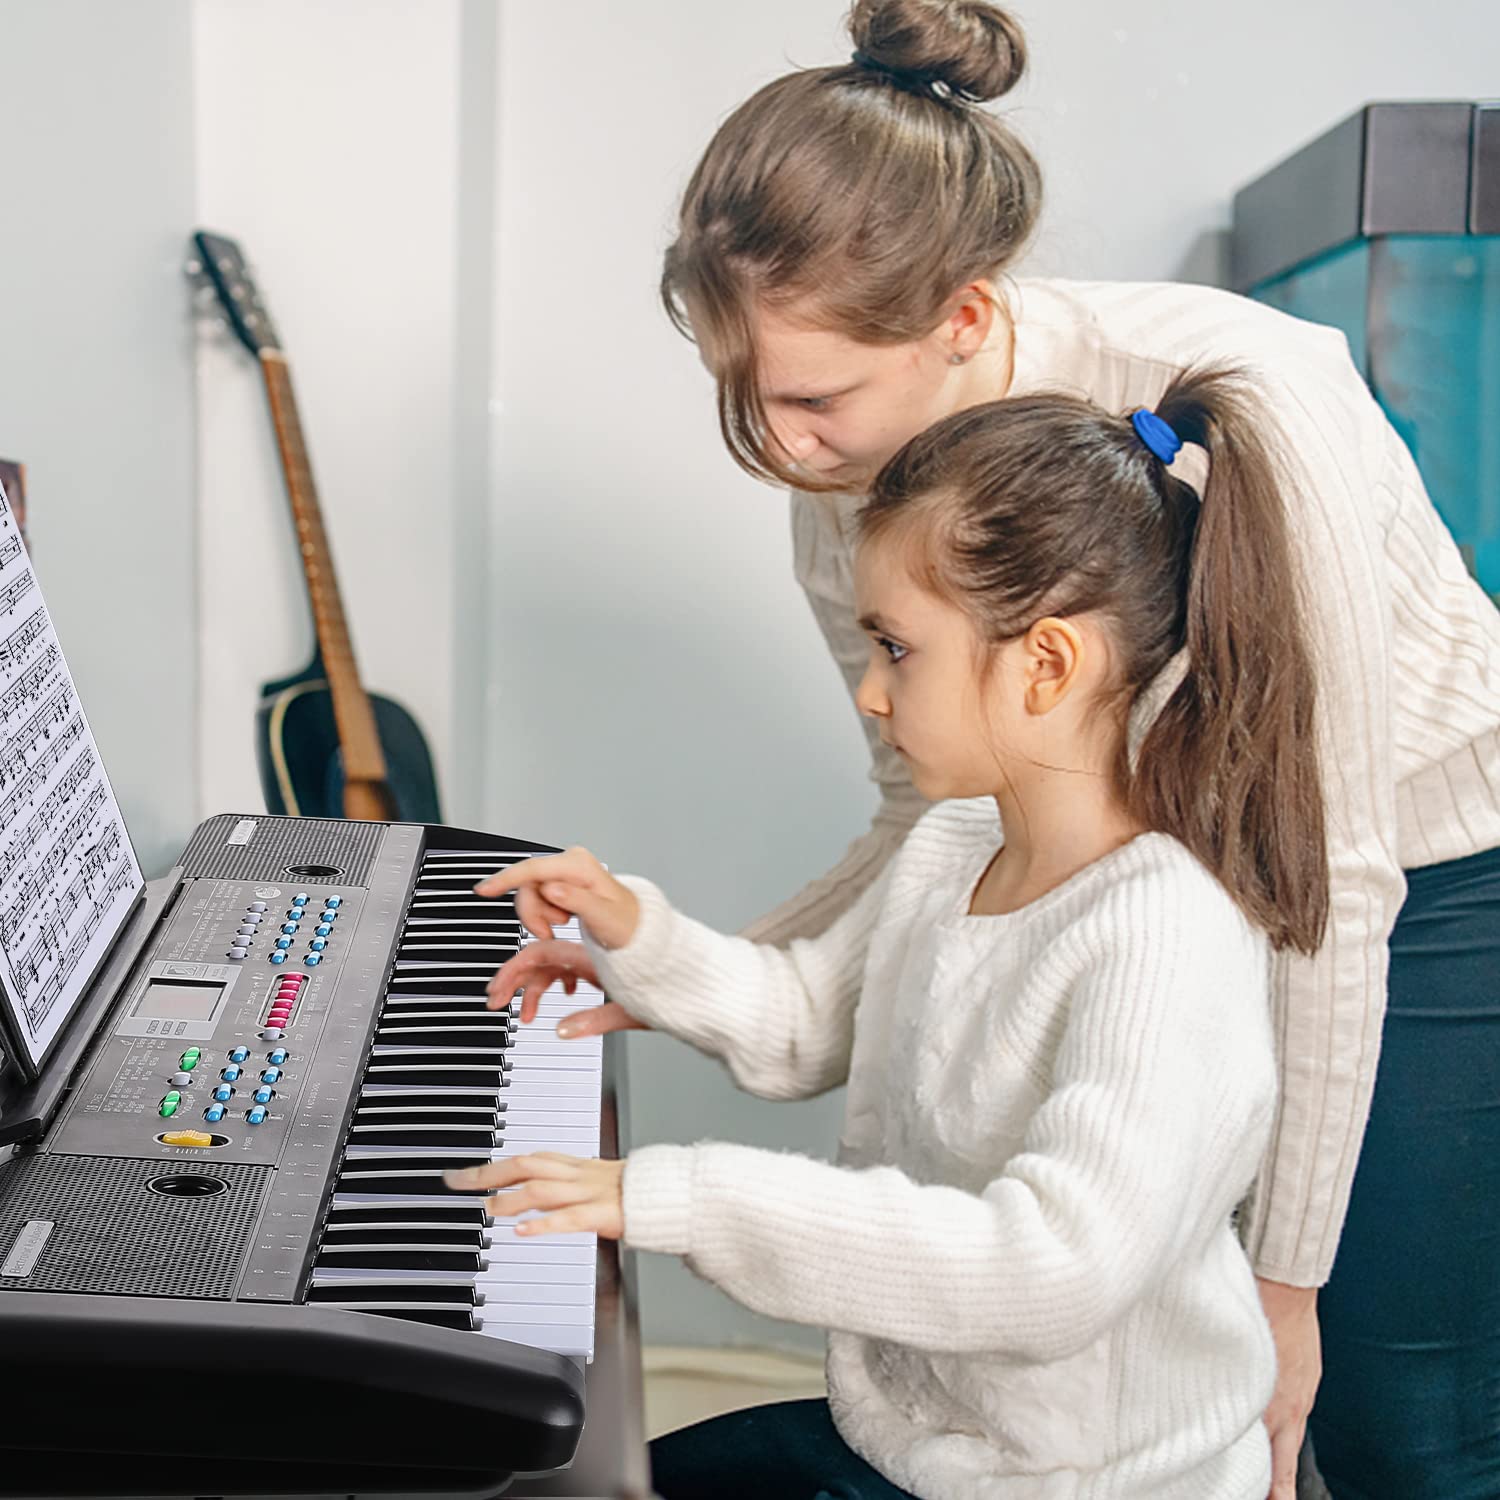 61-Key Electric Keyboard Piano, Portable Piano Keyboard with Music Stand, Microphone, Full-Size, Built-in Speakers, Dual Power Supply, Music Digital Piano for Beginners Kids Adult